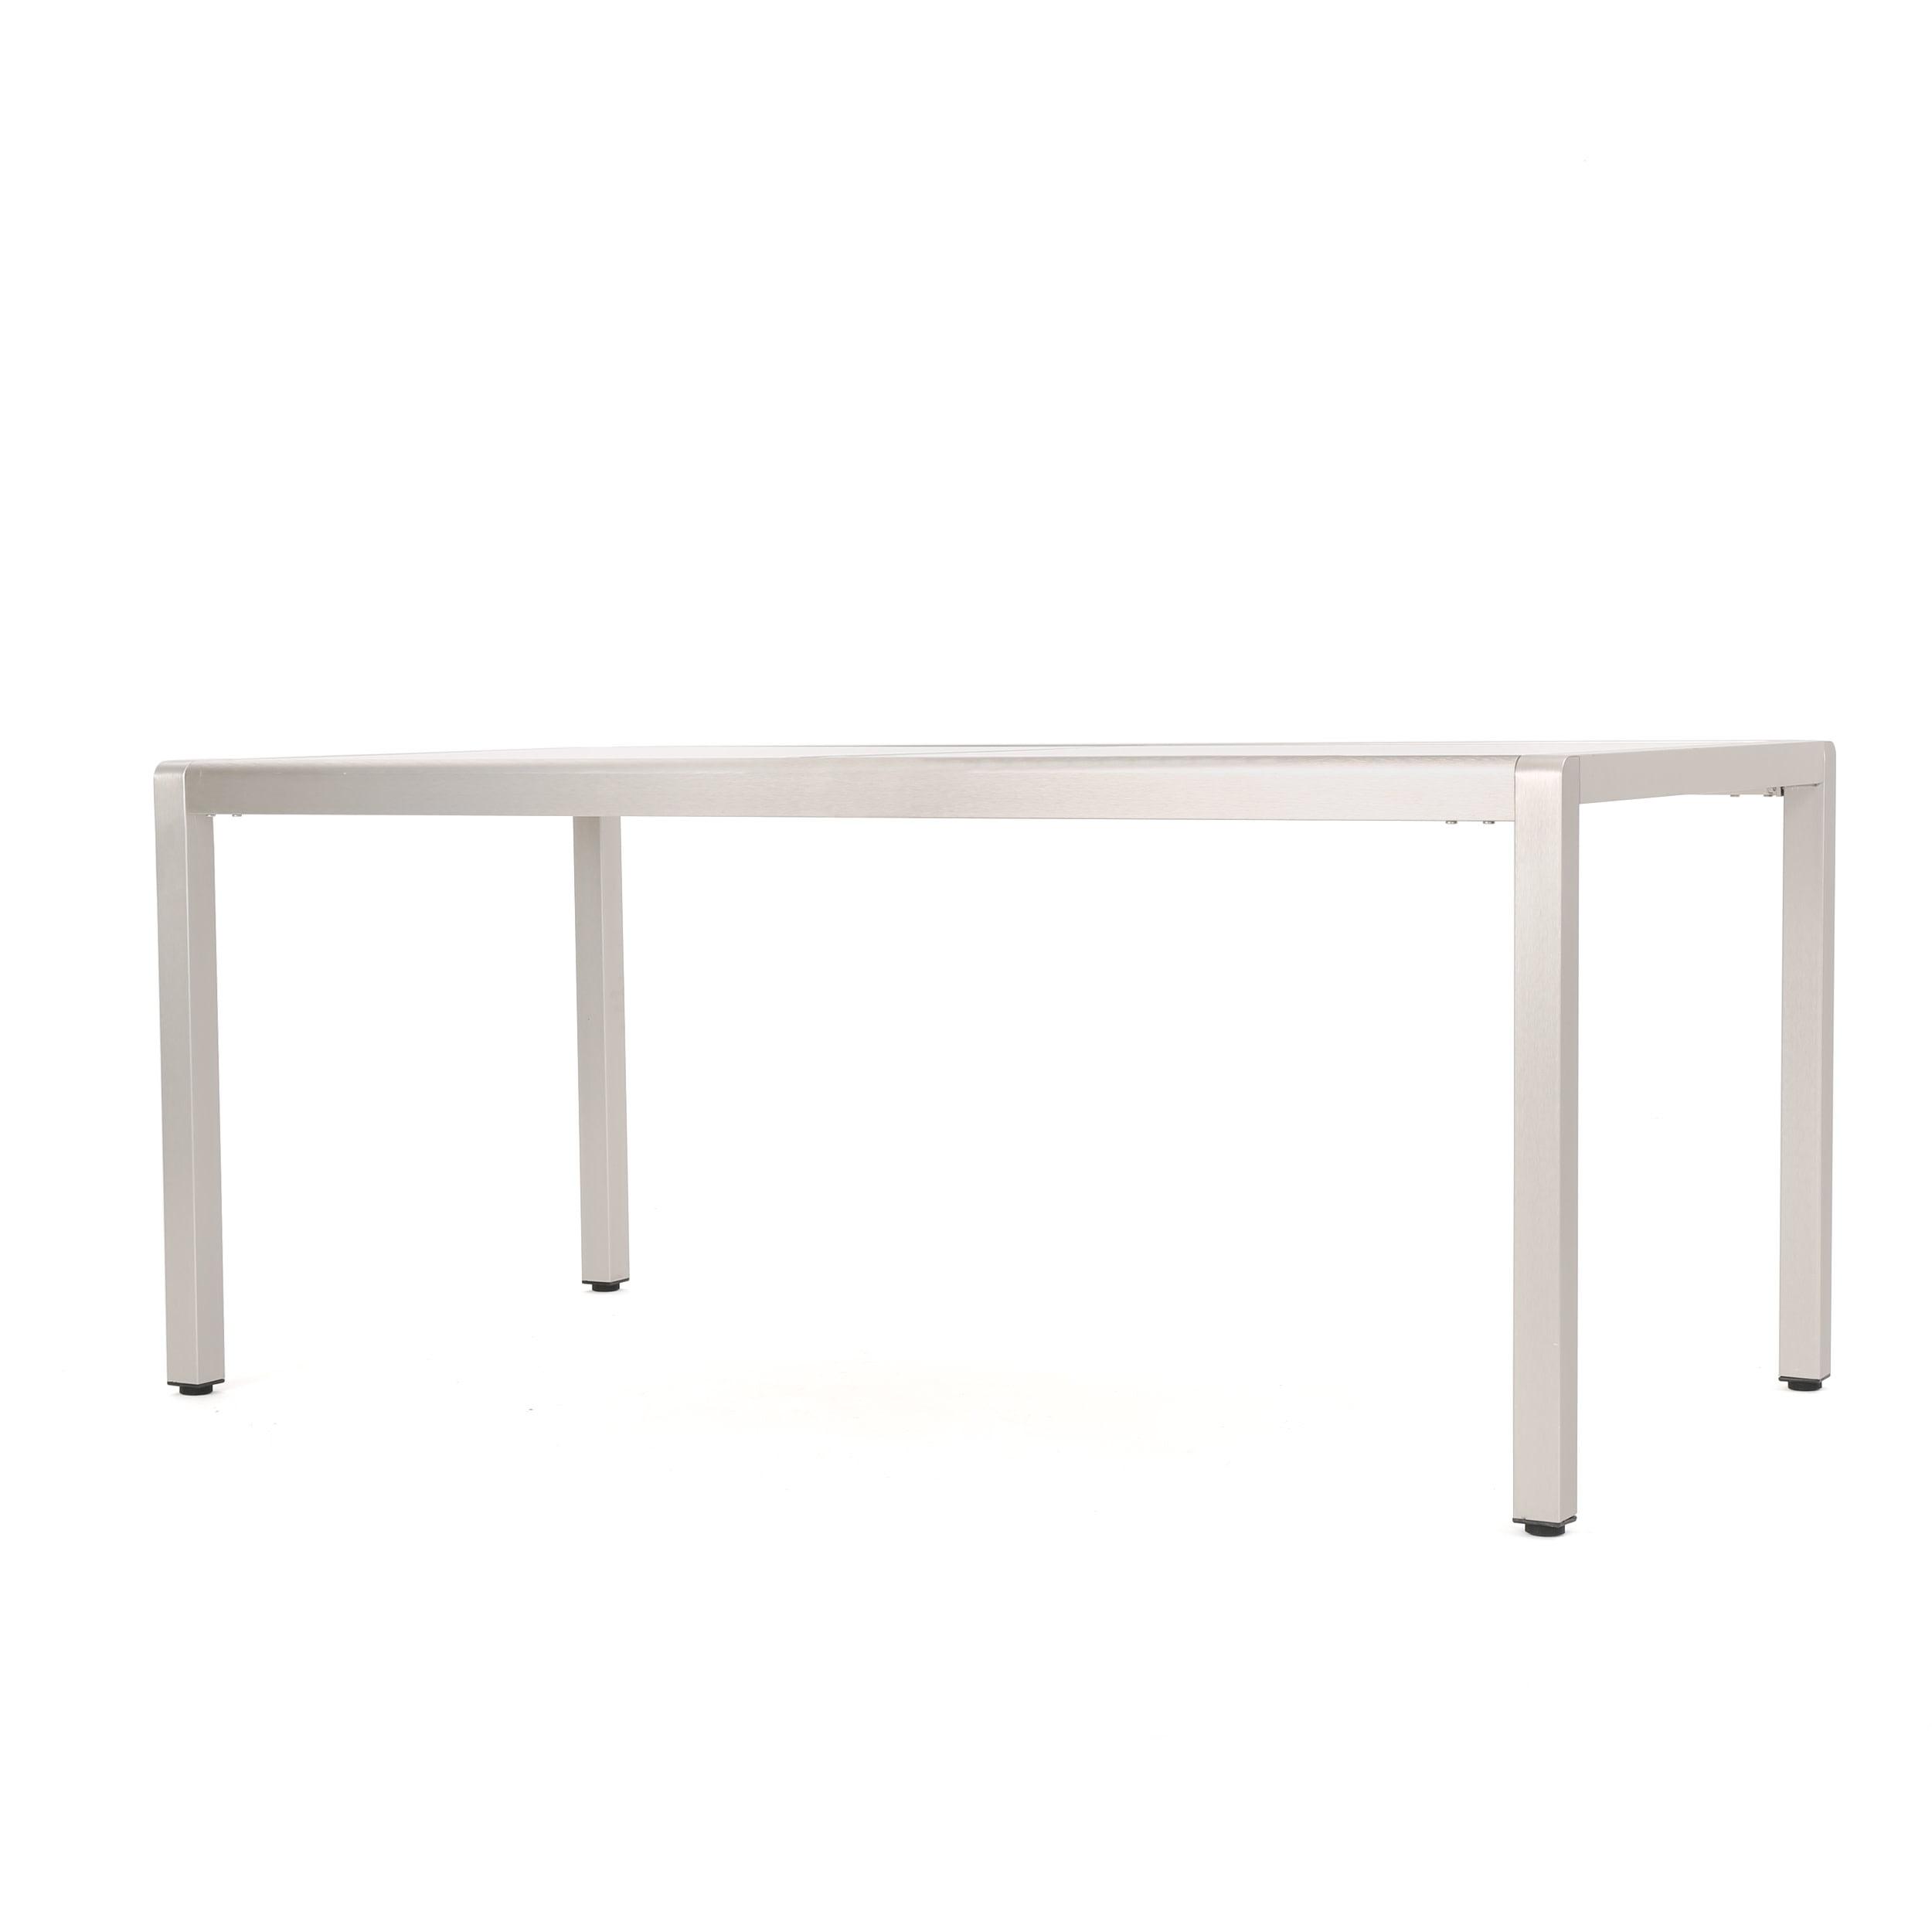 Sleek Aluminum and Opaque Glass Modern Outdoor Dining Table